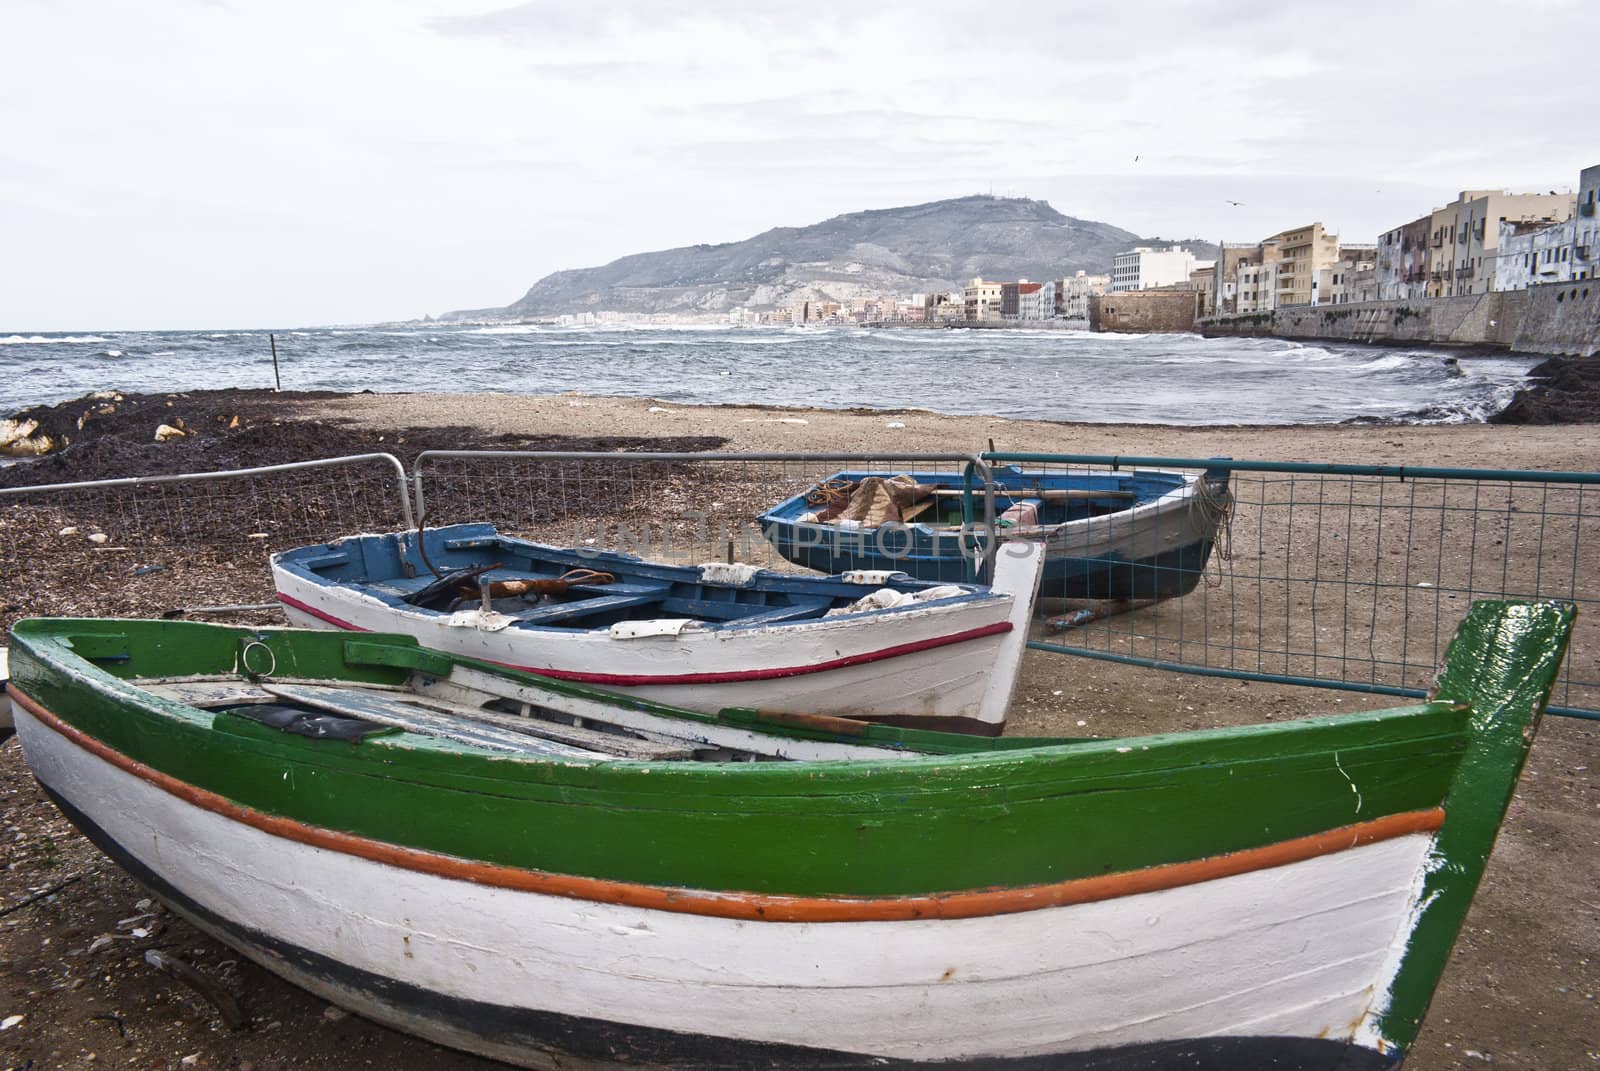 Boats in the marina of trapani with old buildings and sky cloudy